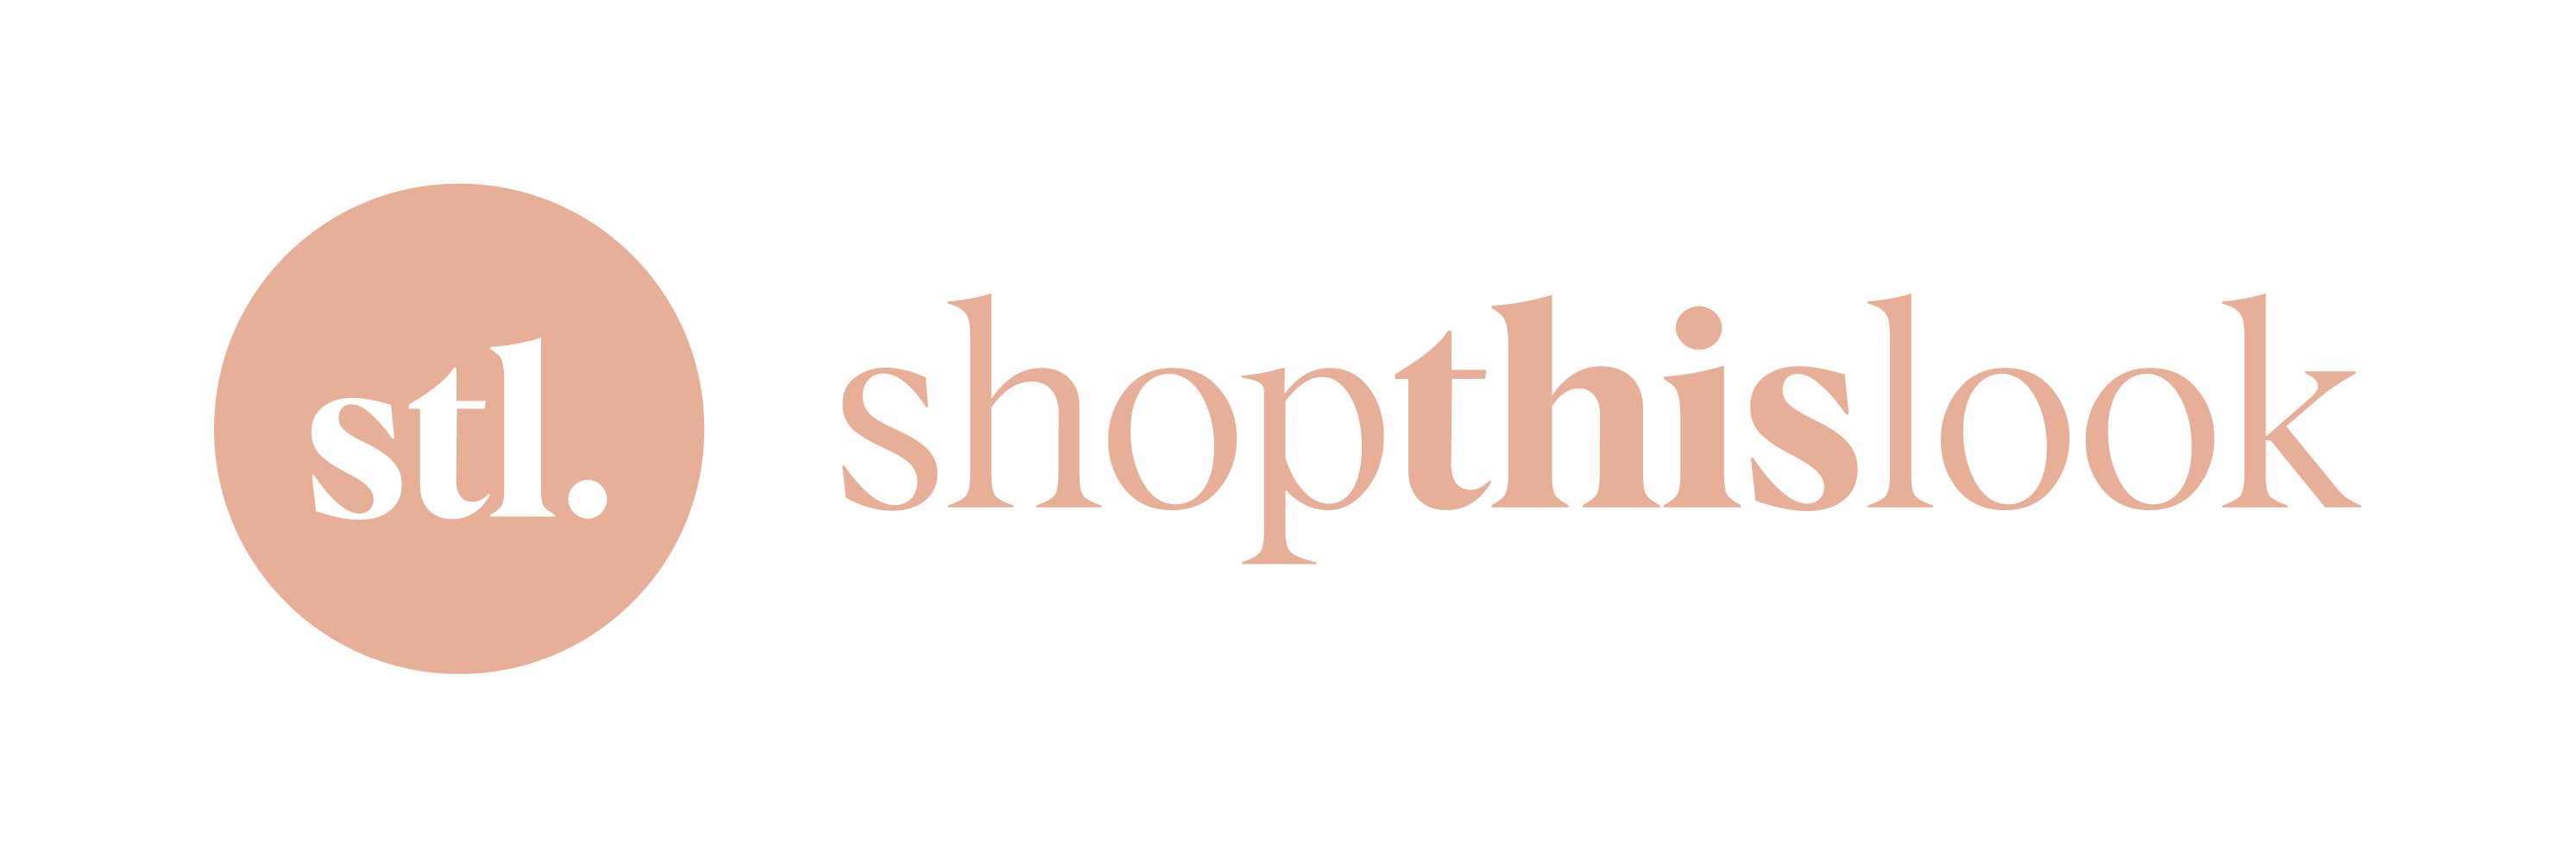 Company logo of Shop This Look